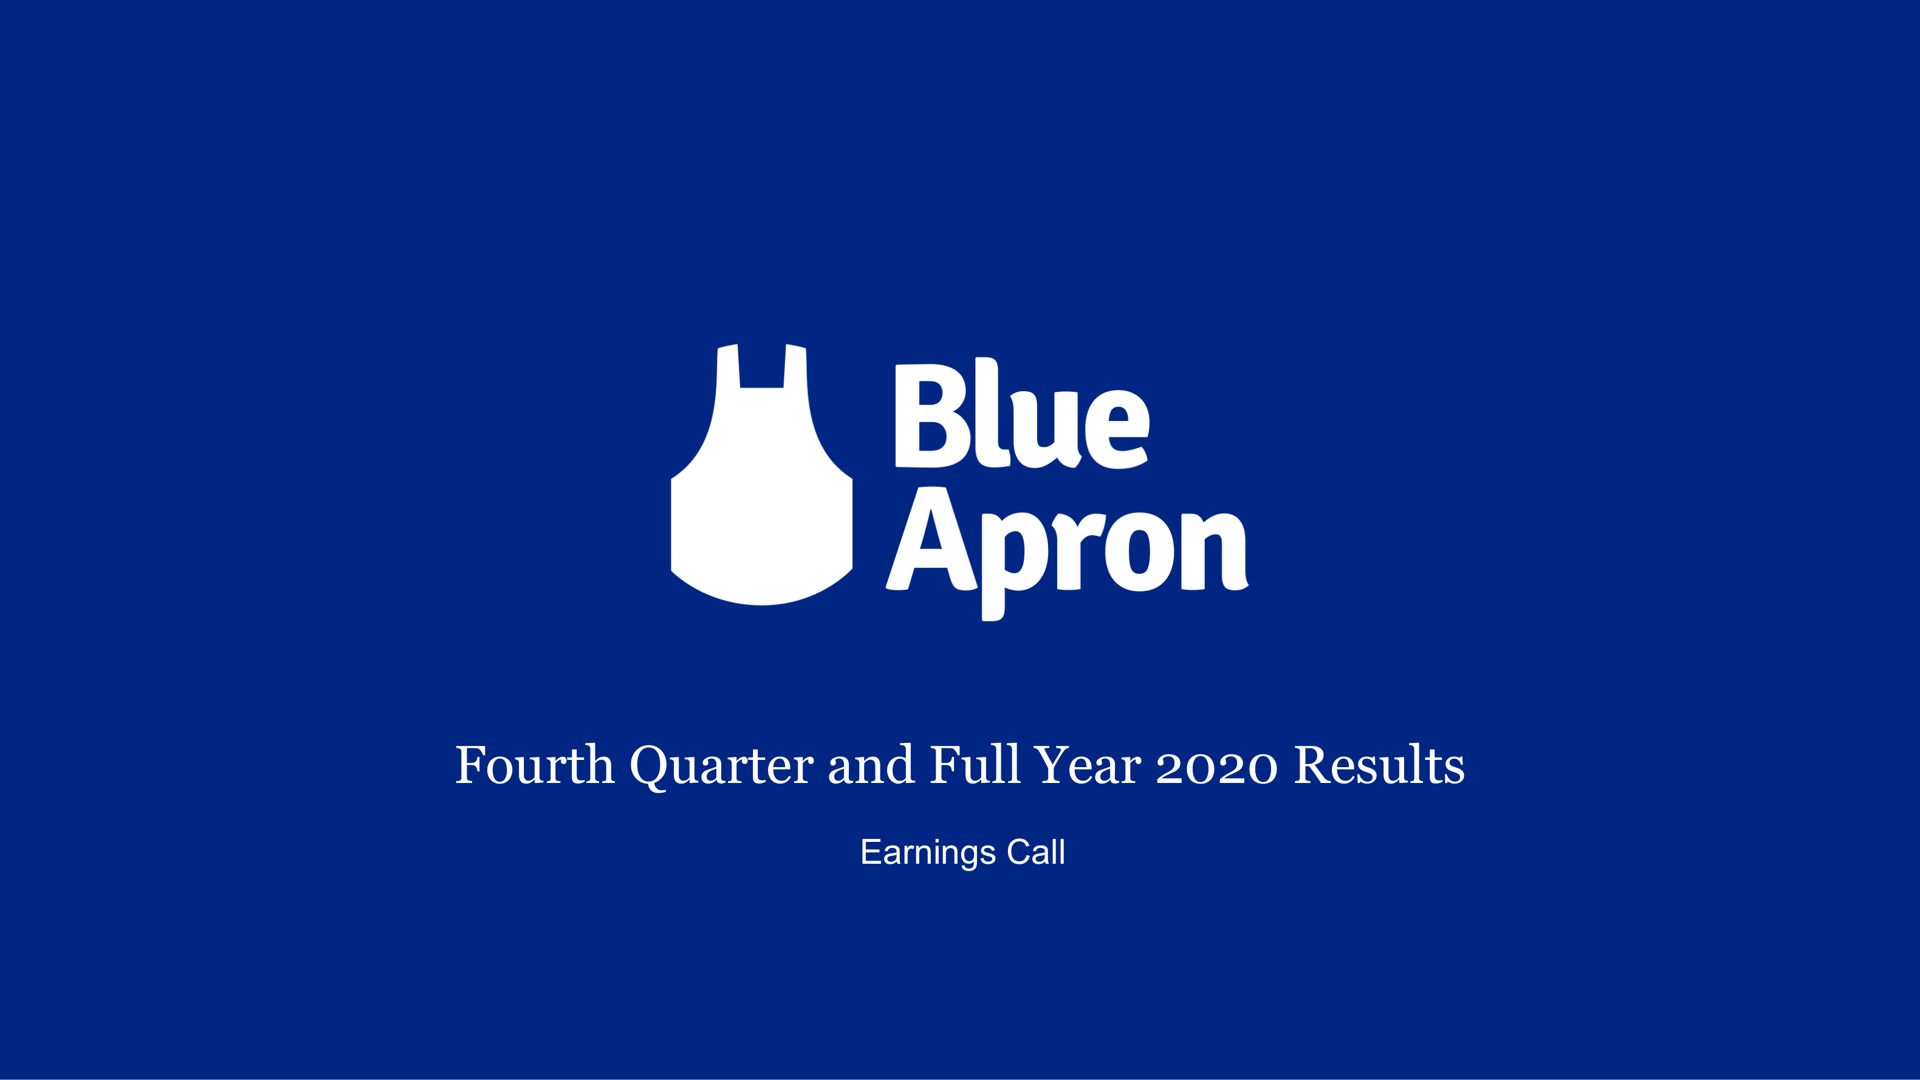 fourth quarter and full year results earnings call blue apron | Blue Apron